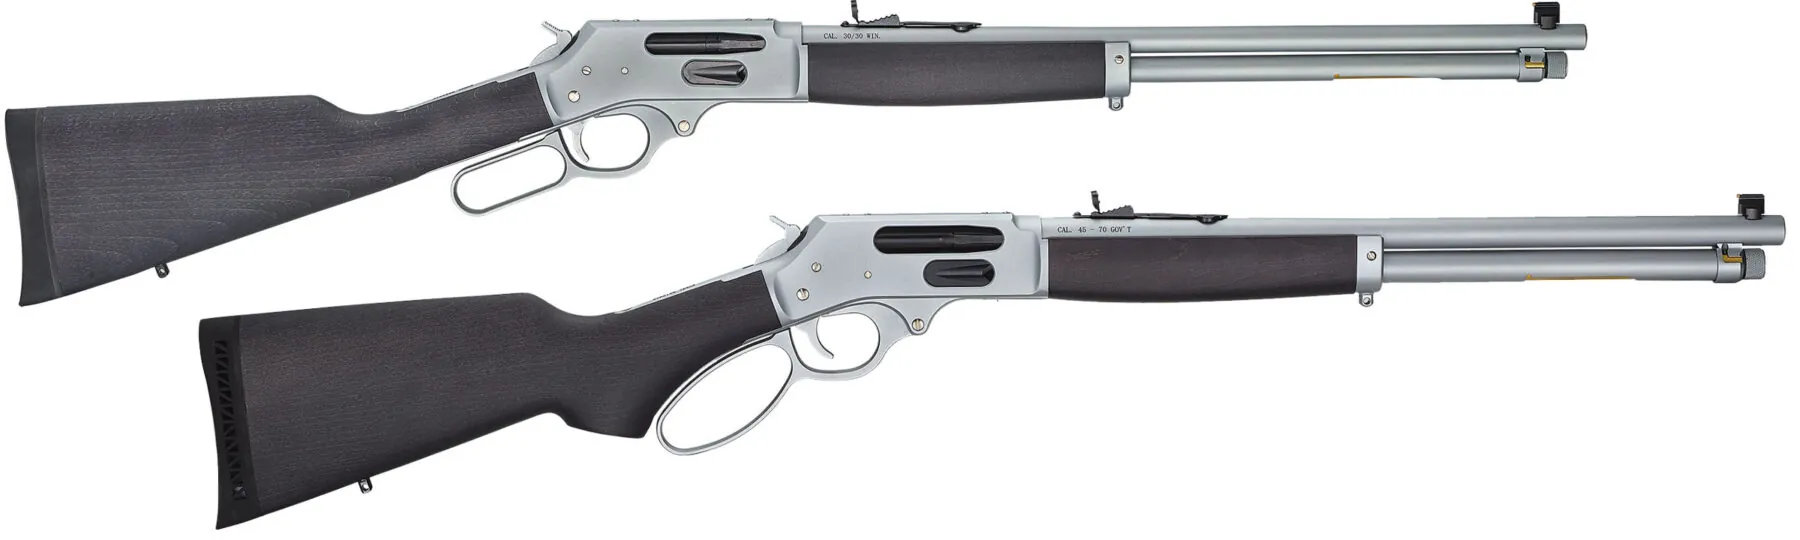 All-Weather Lever Action